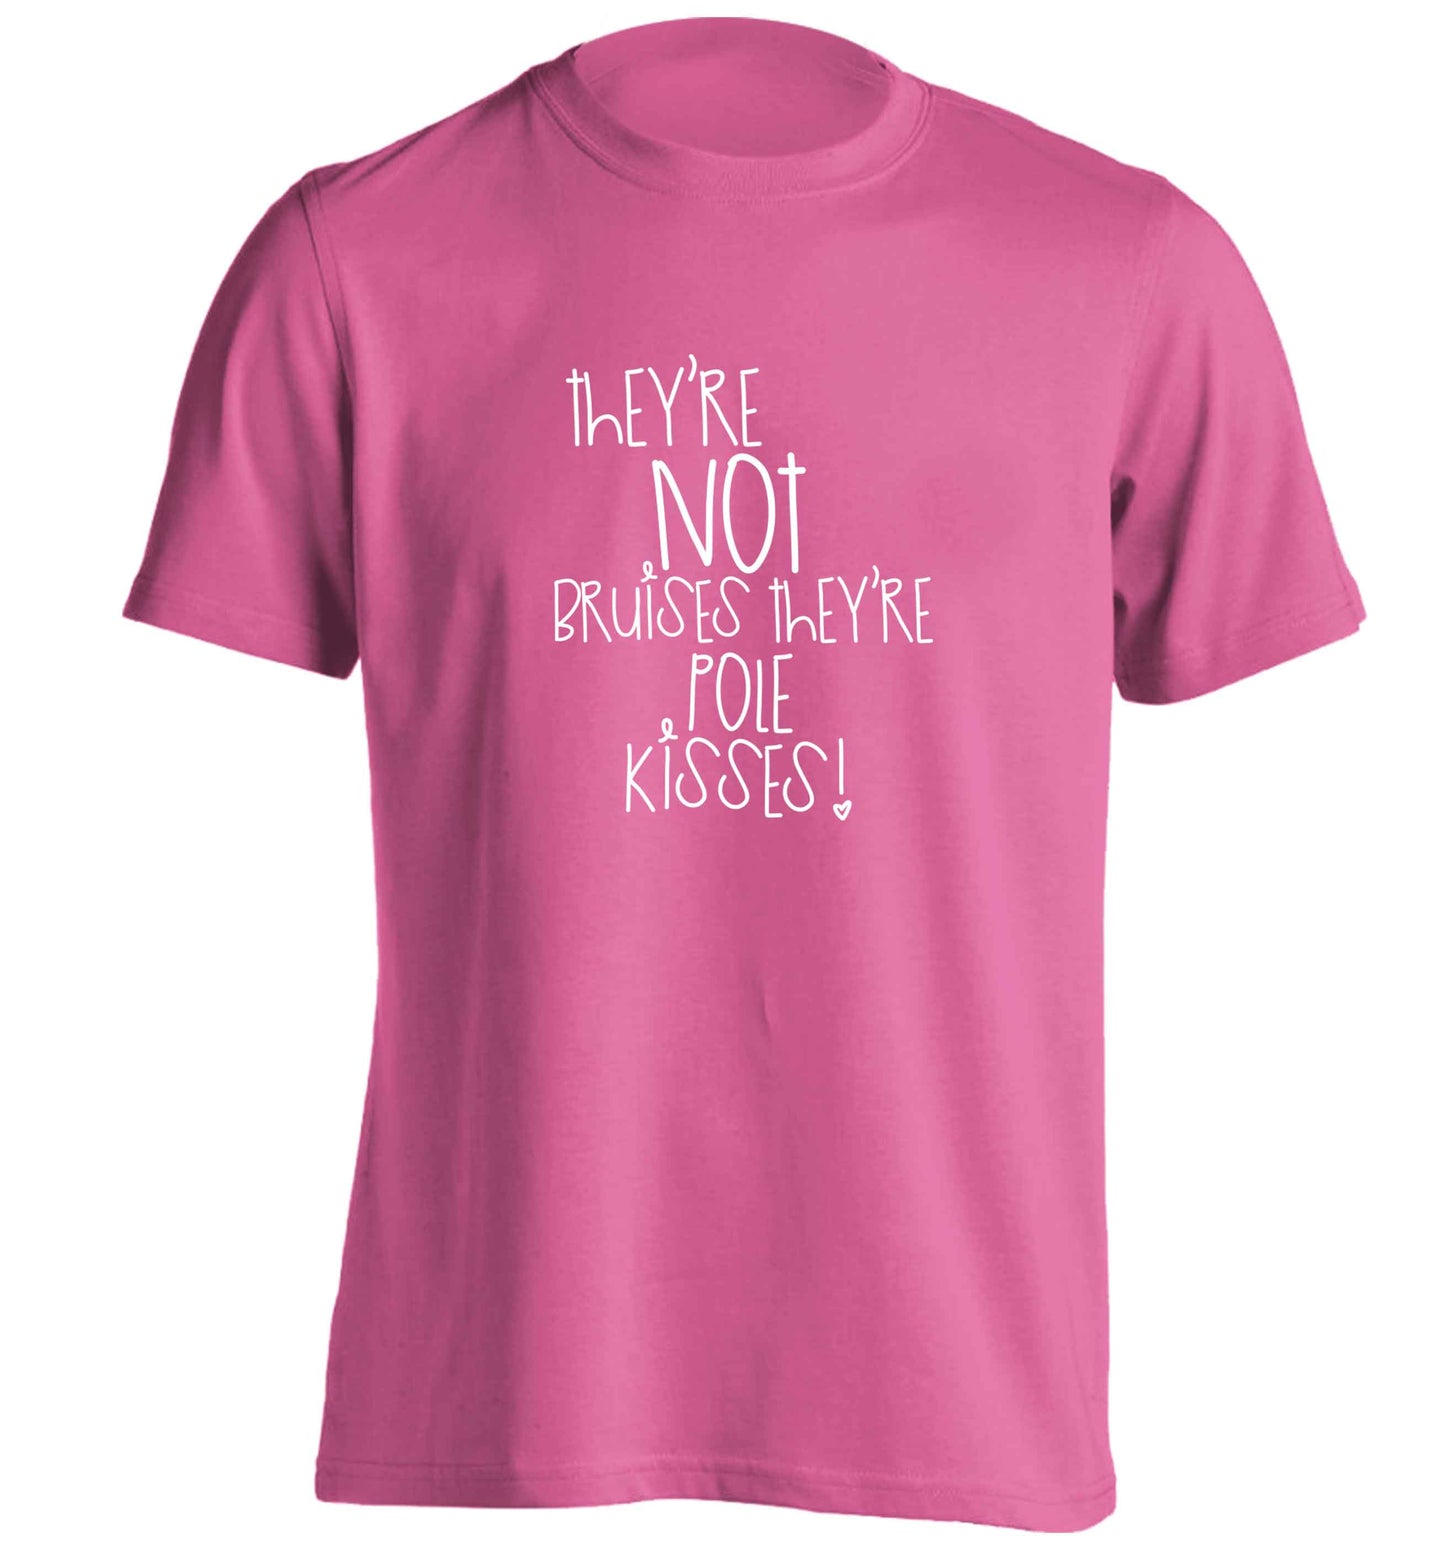 They're not bruises they're pole kisses adults unisex pink Tshirt 2XL